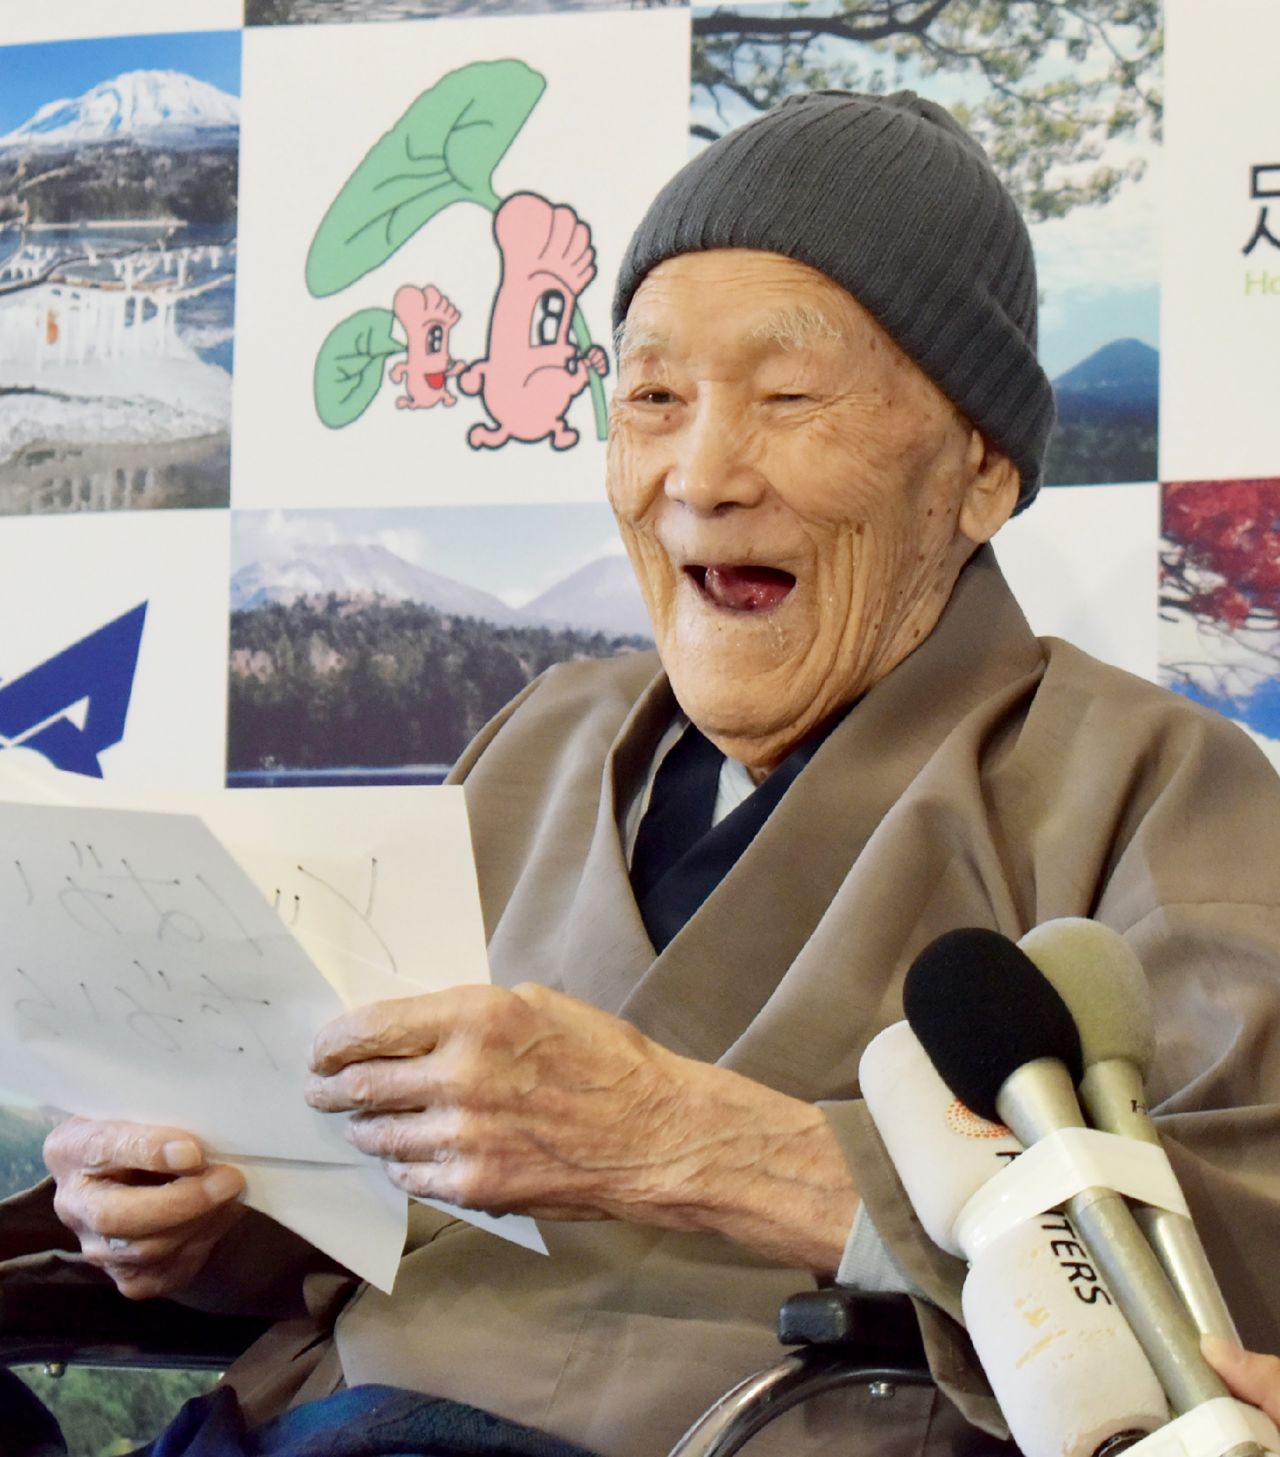 <a href="https://www.cnn.com/2019/01/20/asia/oldest-man-japan-dies/index.html" target="_blank">Masazo Nonaka</a>, a 113-year-old Japanese man recognized in April as the world's oldest man, died on January 20, according to Japanese public service broadcaster NHK.